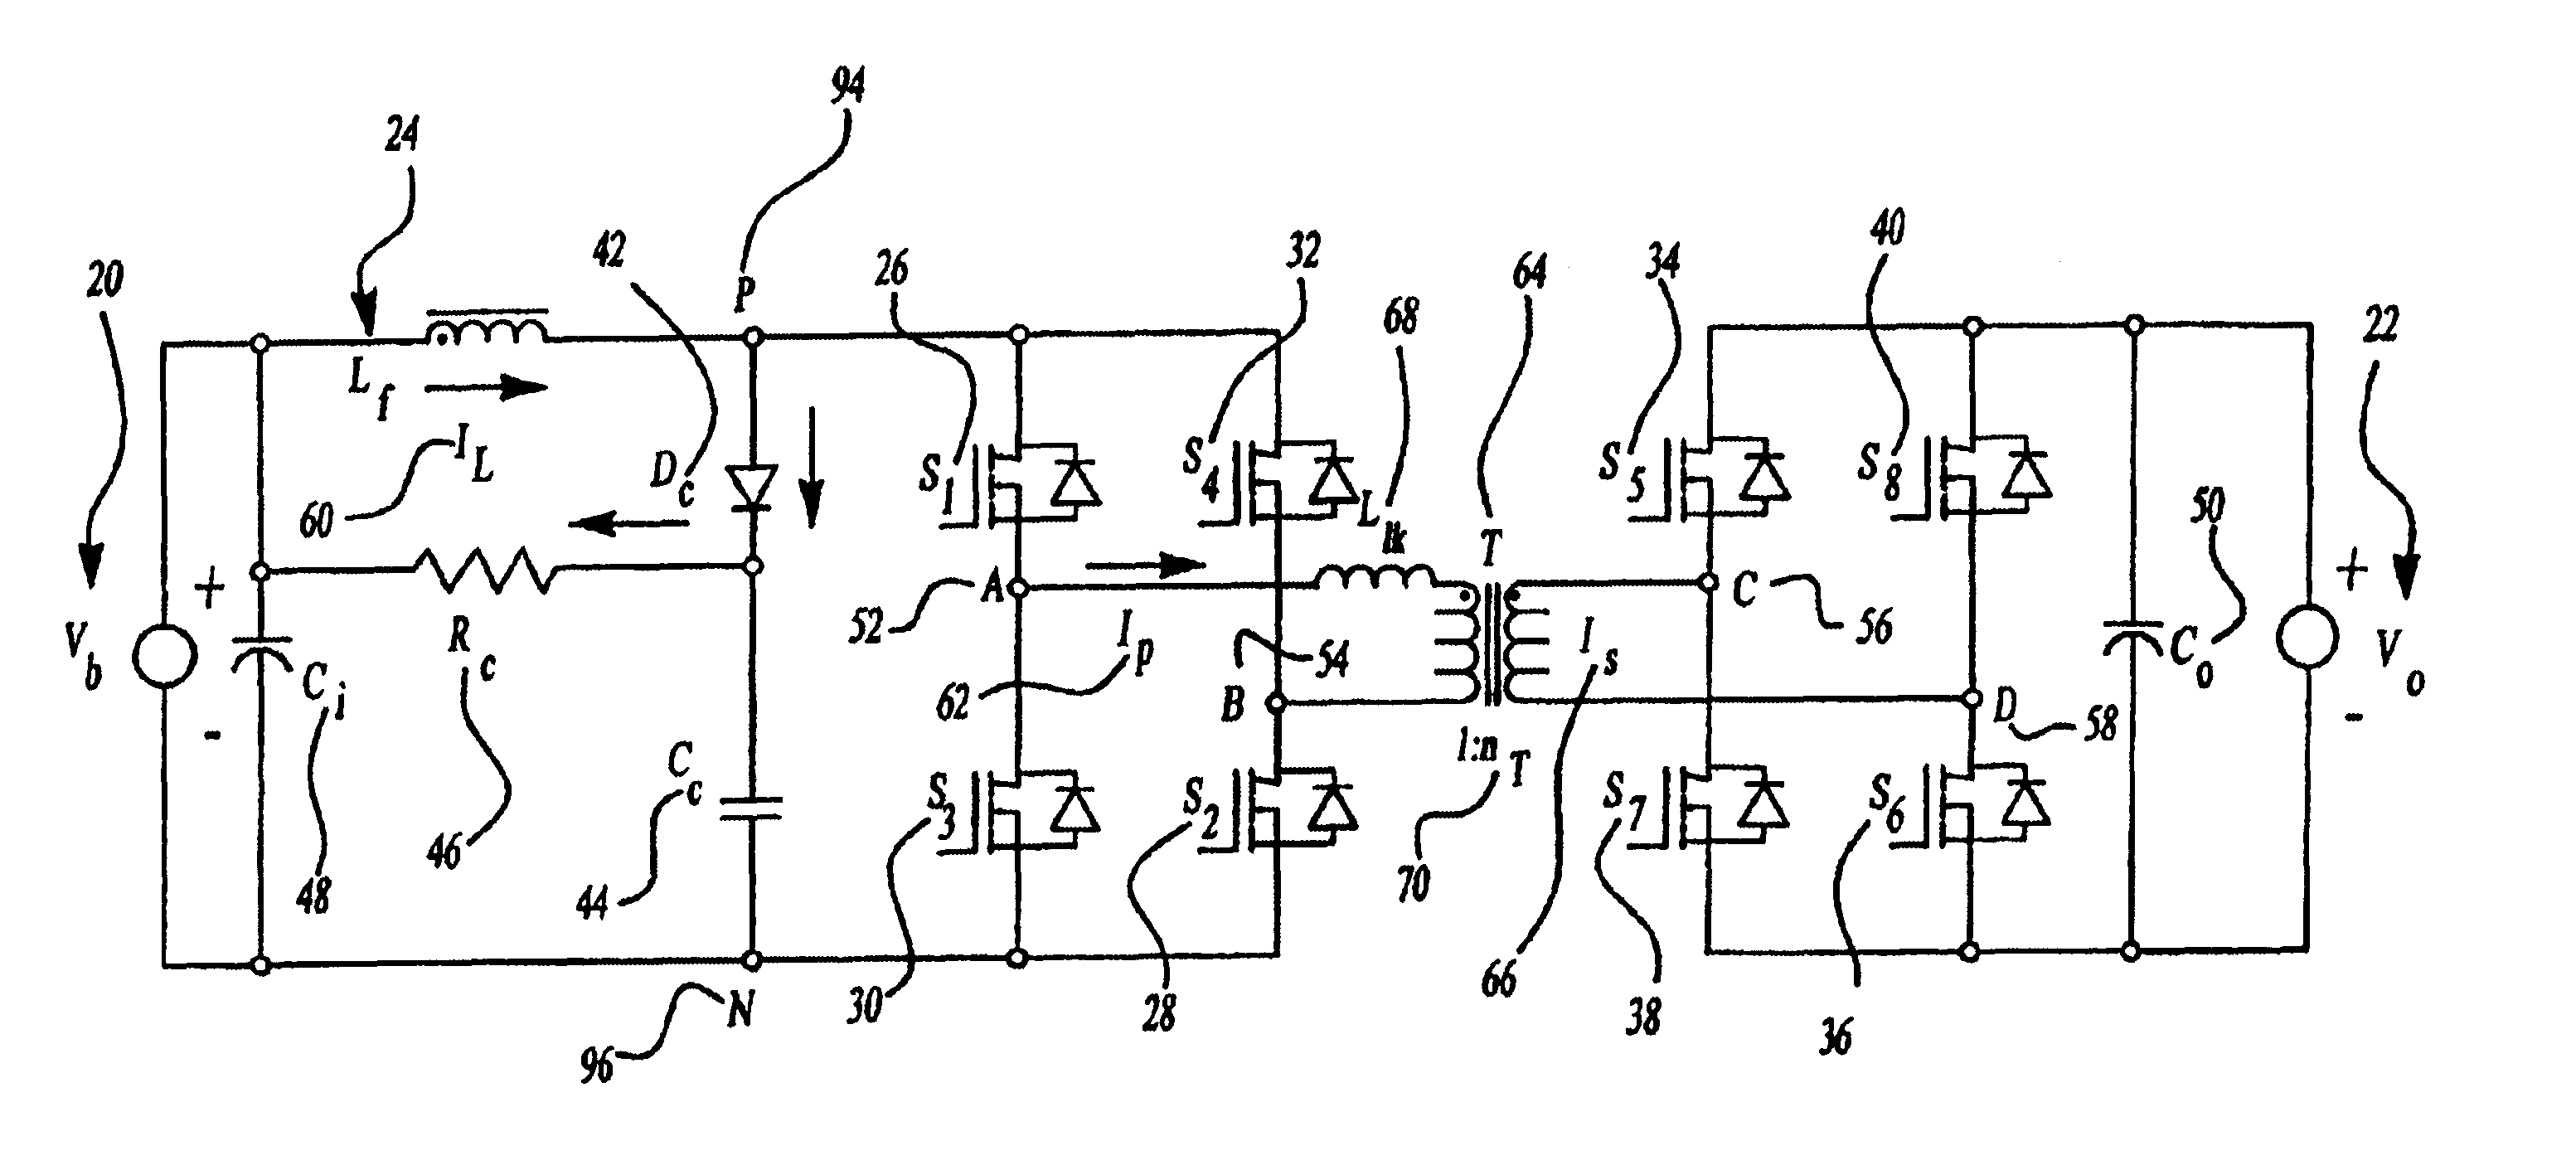 Accelerated commutation for passive clamp isolated boost converters